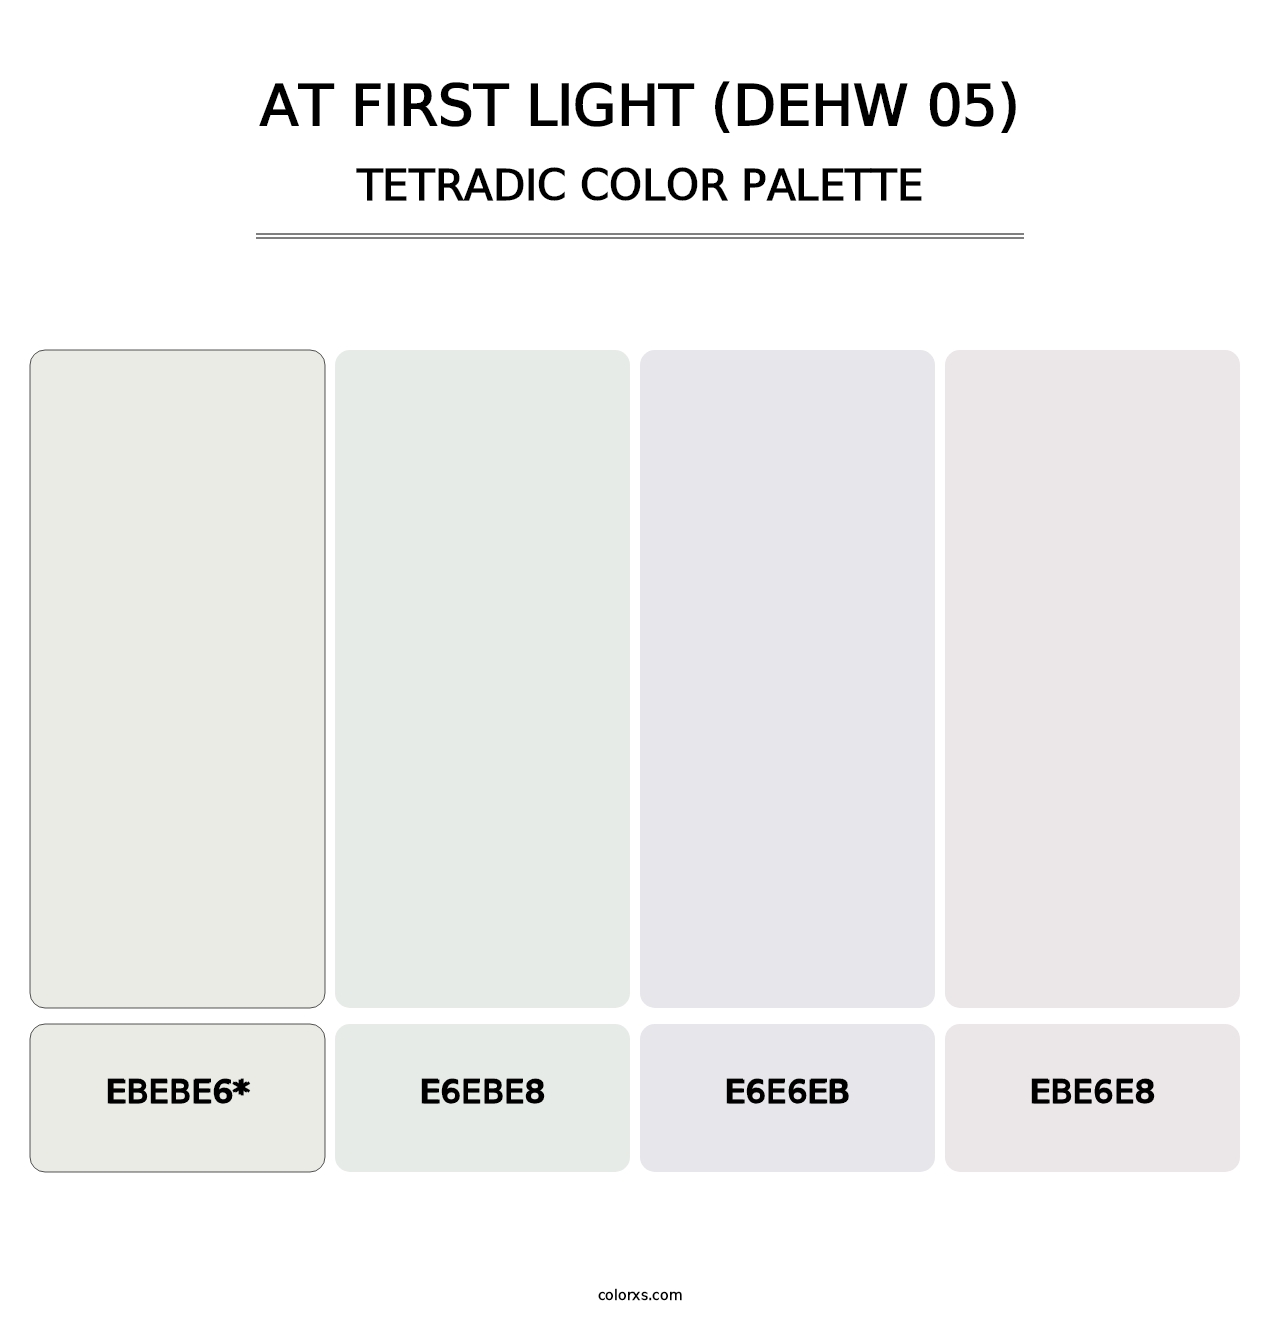 At First Light (DEHW 05) - Tetradic Color Palette